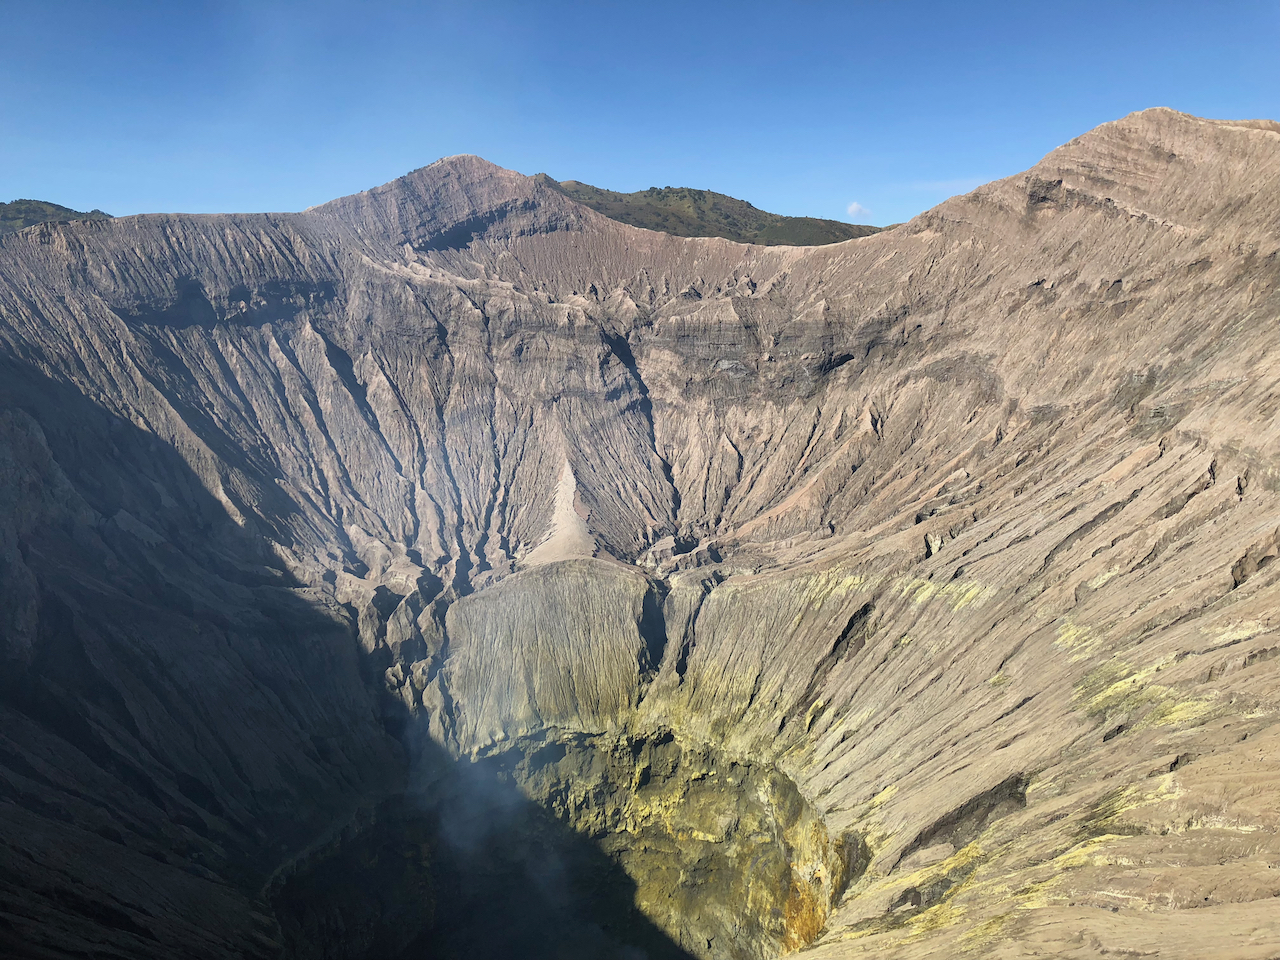 The crater of Bromo in 2018.